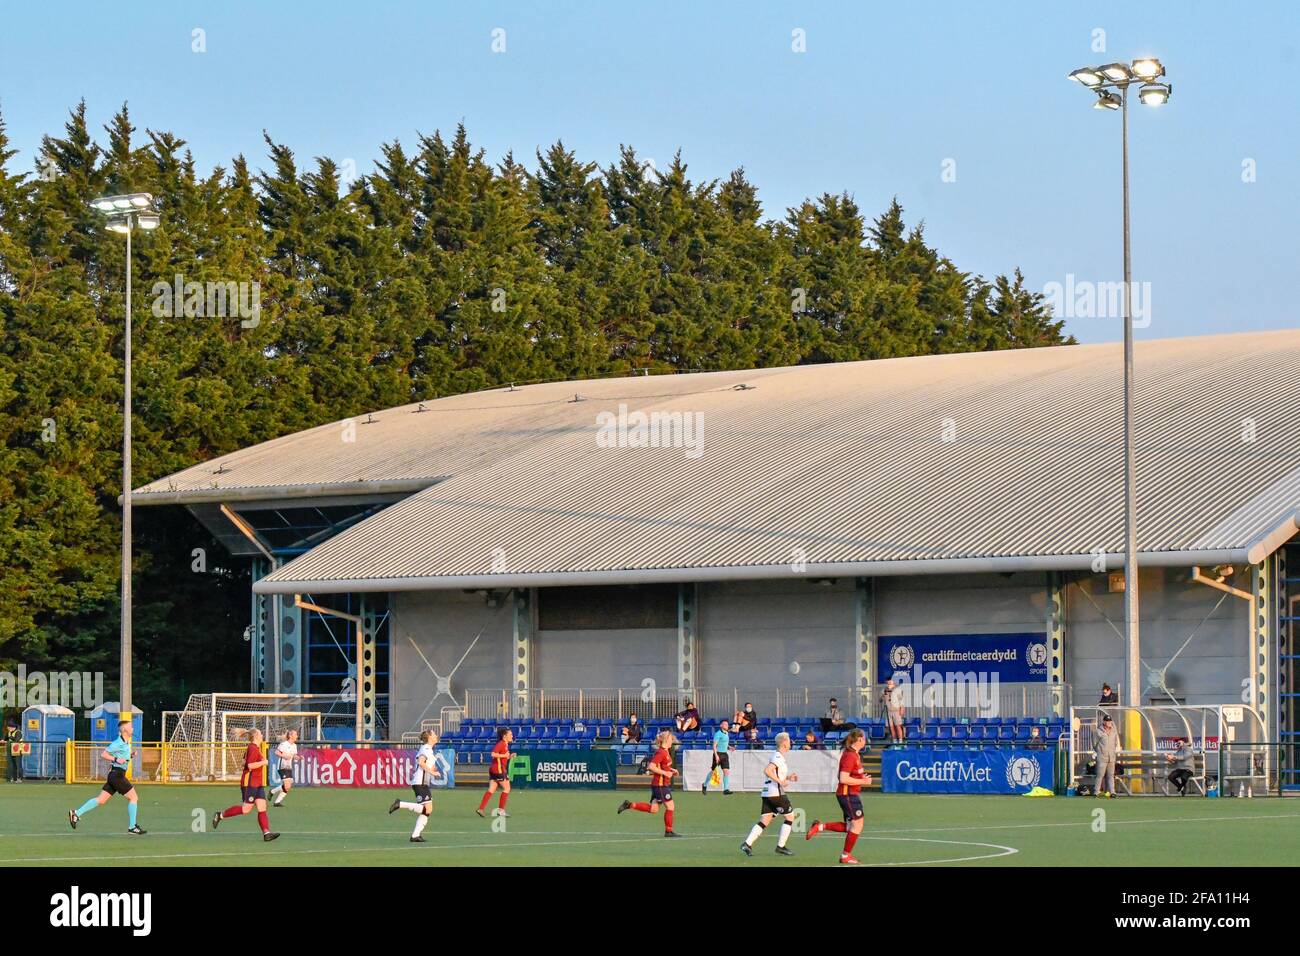 Cardiff, Wales. 21 April, 2021. Players on the field during the Welsh Premier Women's League match between Cardiff Met Women and Swansea City Ladies at the Cyncoed Campus in Cardiff, Wales, UK on 21, April 2021. Credit: Duncan Thomas/Majestic Media/Alamy Live News. Stock Photo